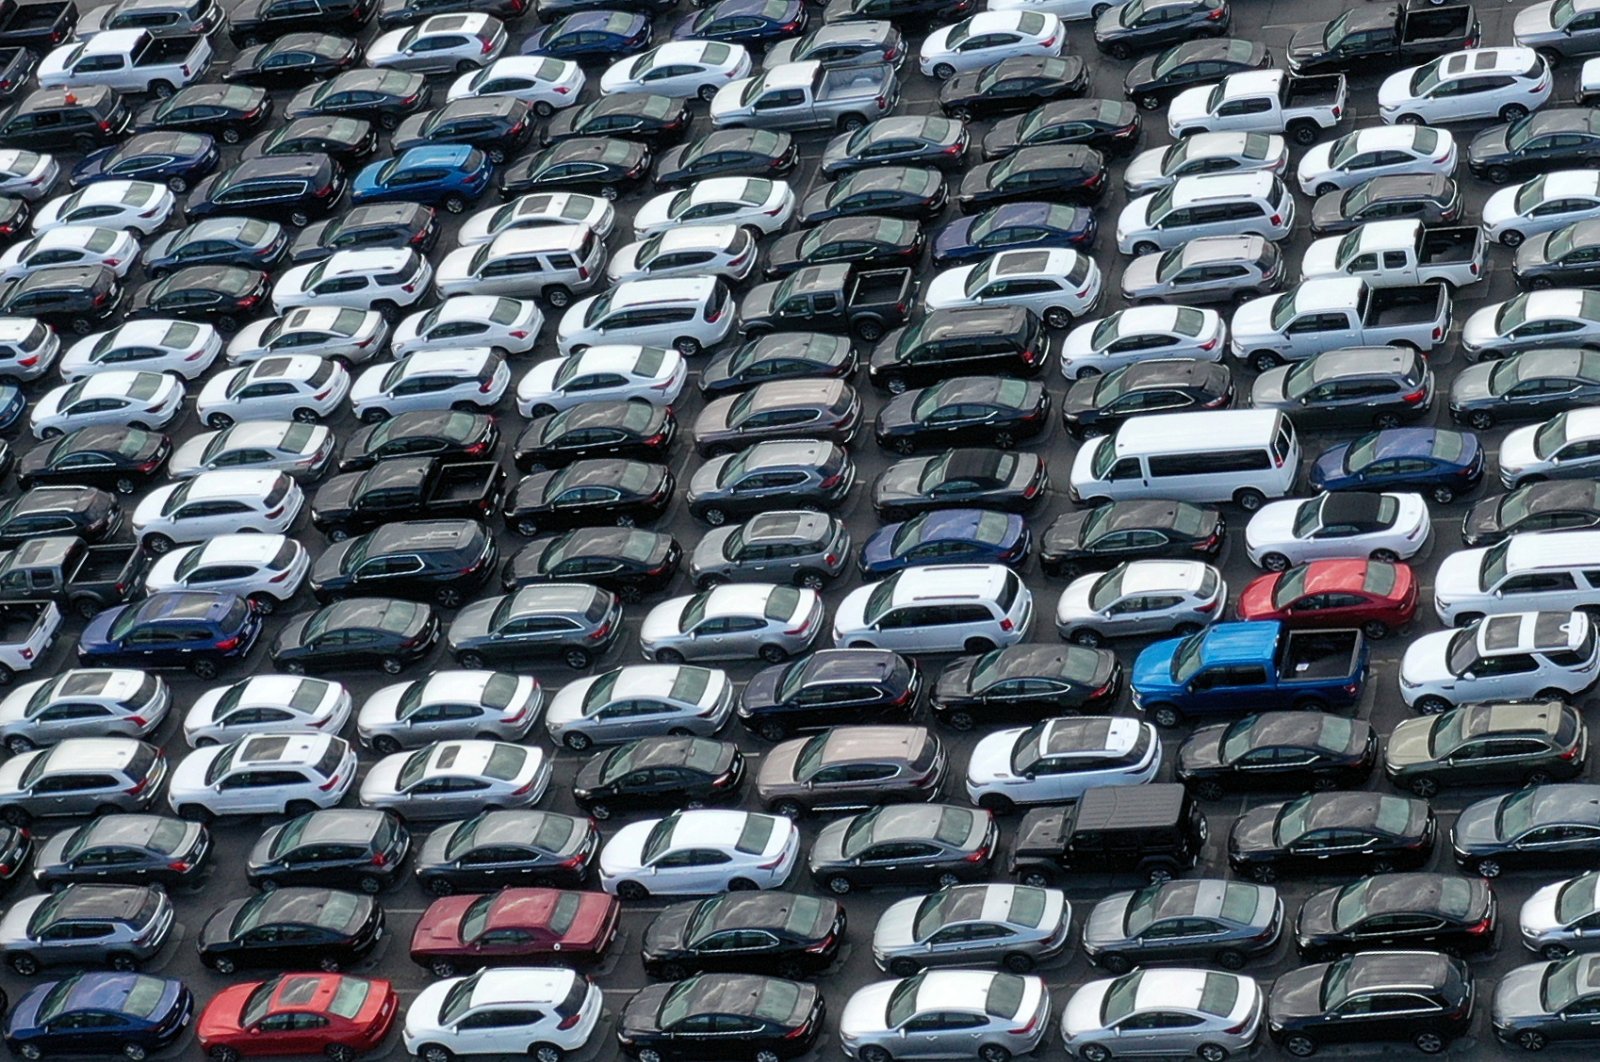 Unused rental cars fill the Dodger Stadium parking lot as the spread of the coronavirus continues, Los Angeles, California, April 7, 2020. (Reuters Photo)